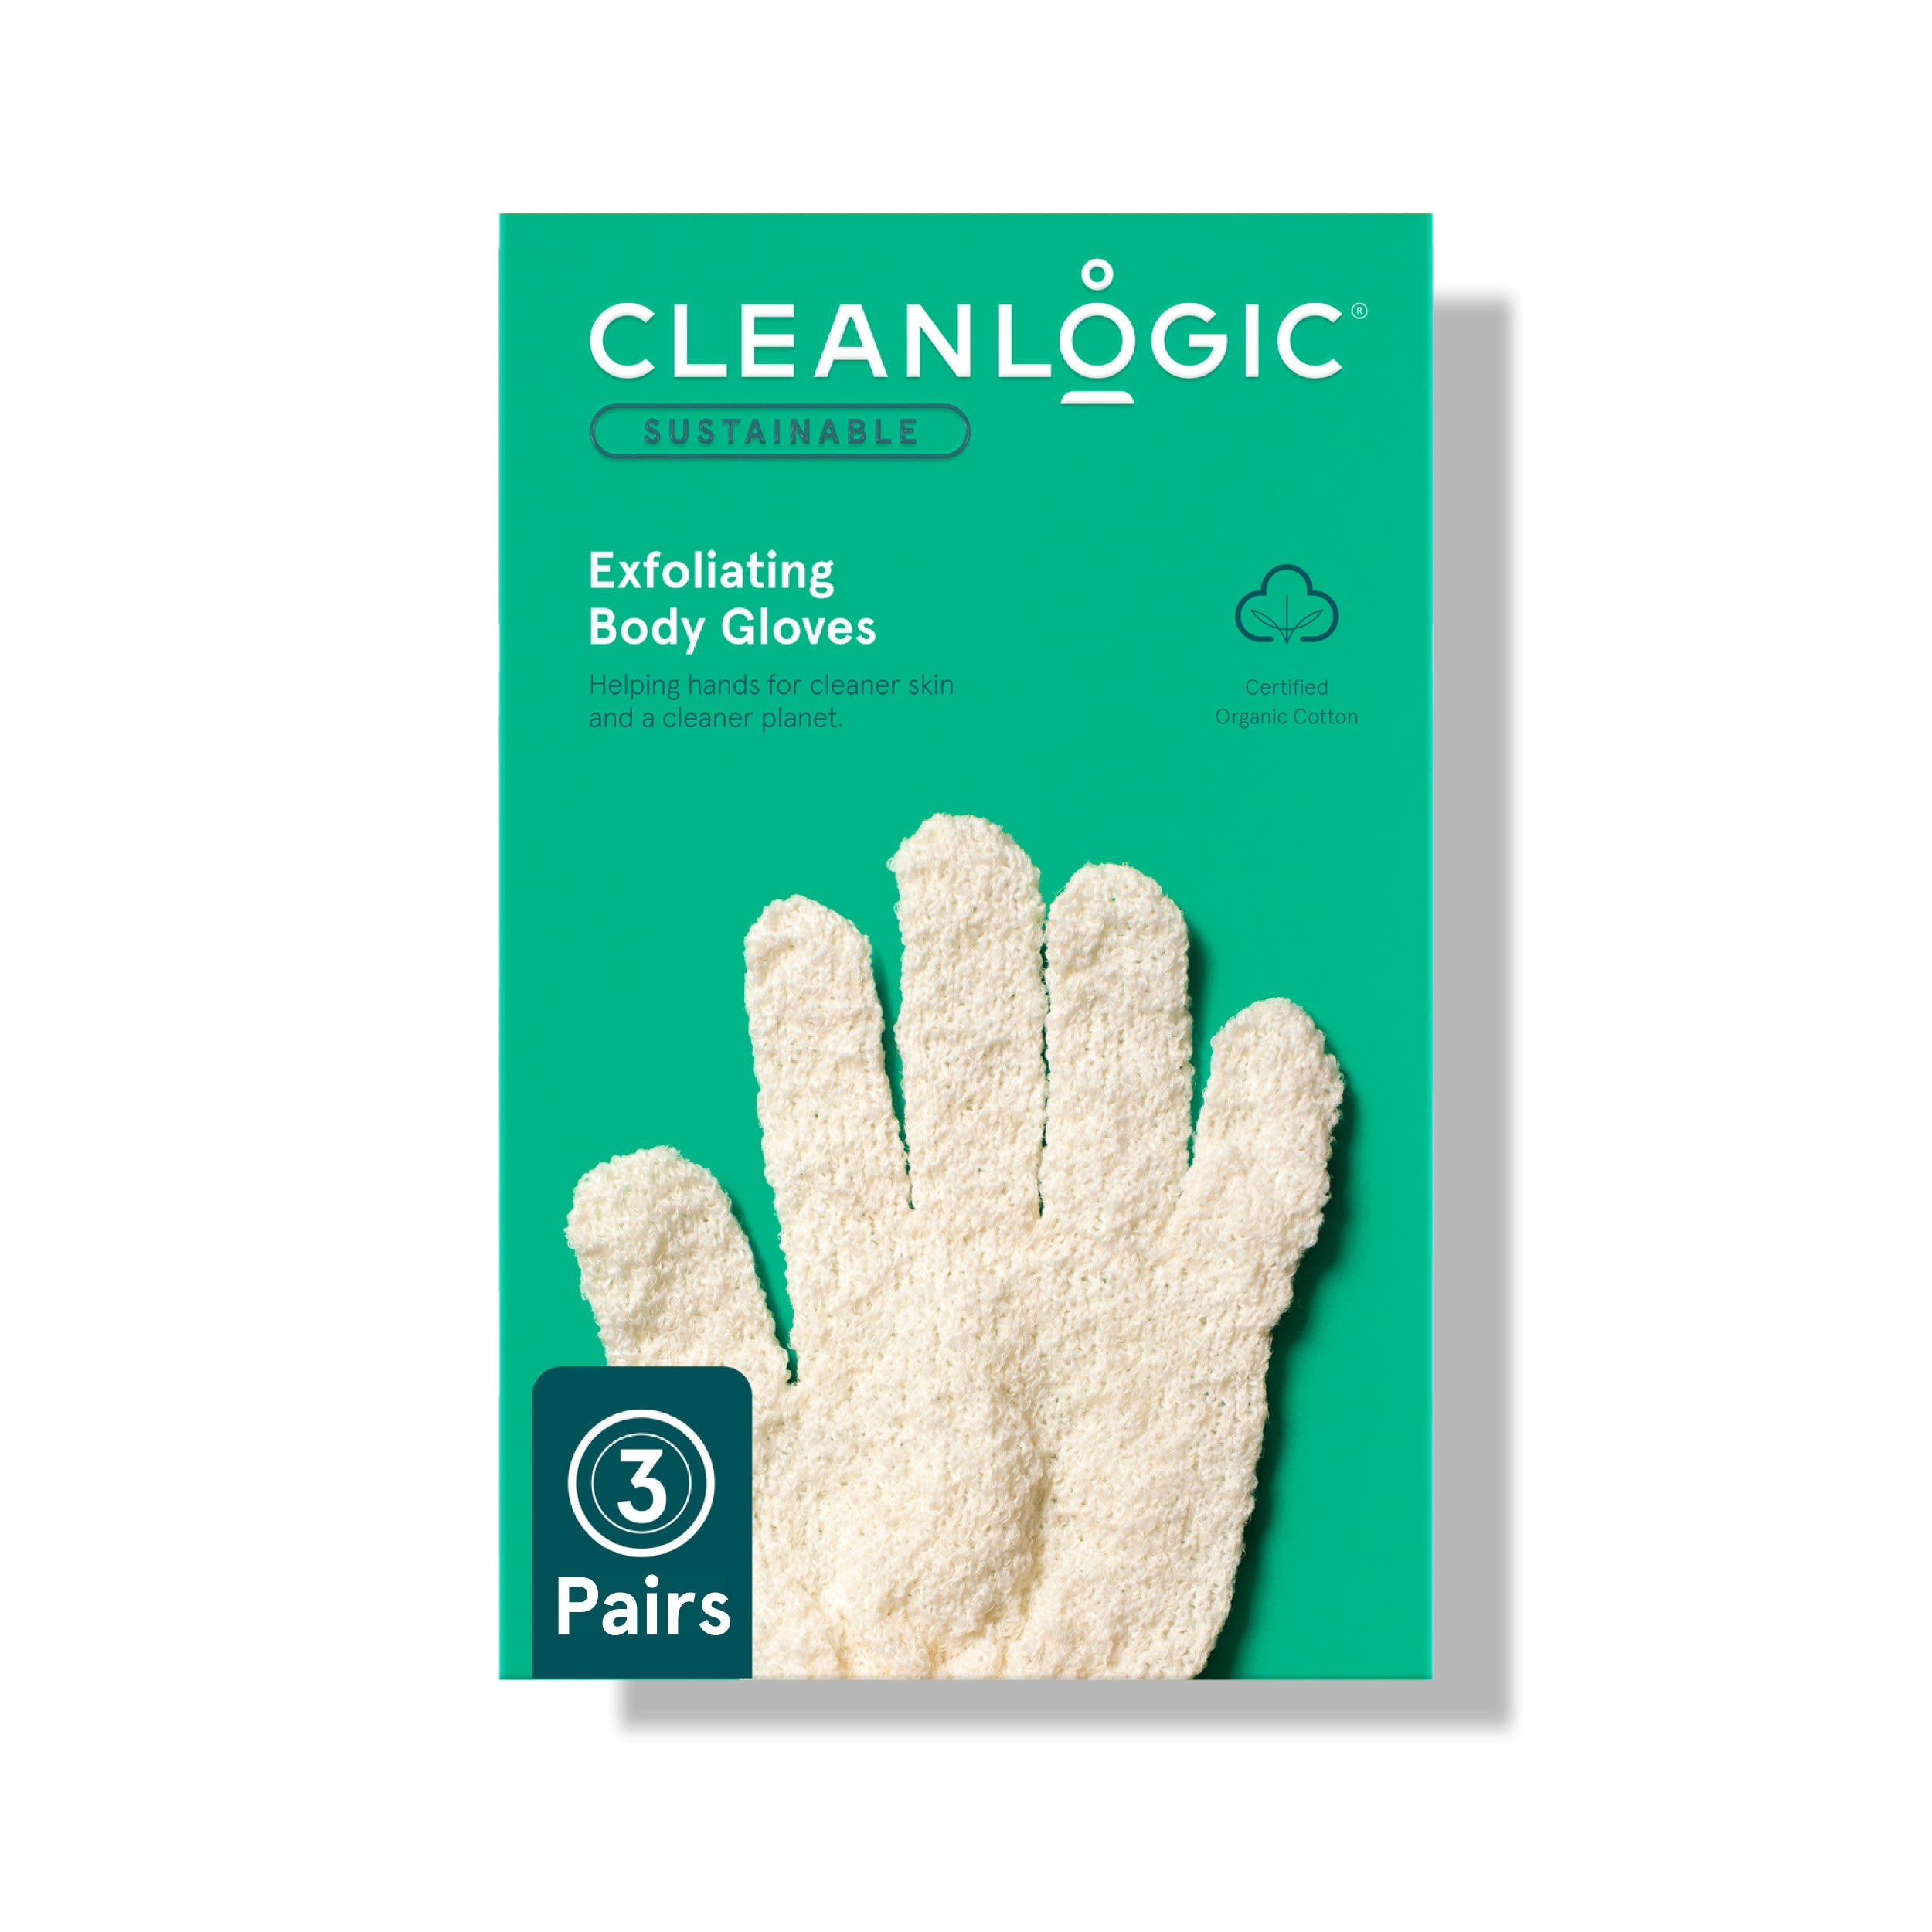 Sustainable Exfoliating Body Gloves, 3 Pair – 6 Count – Cleanlogic